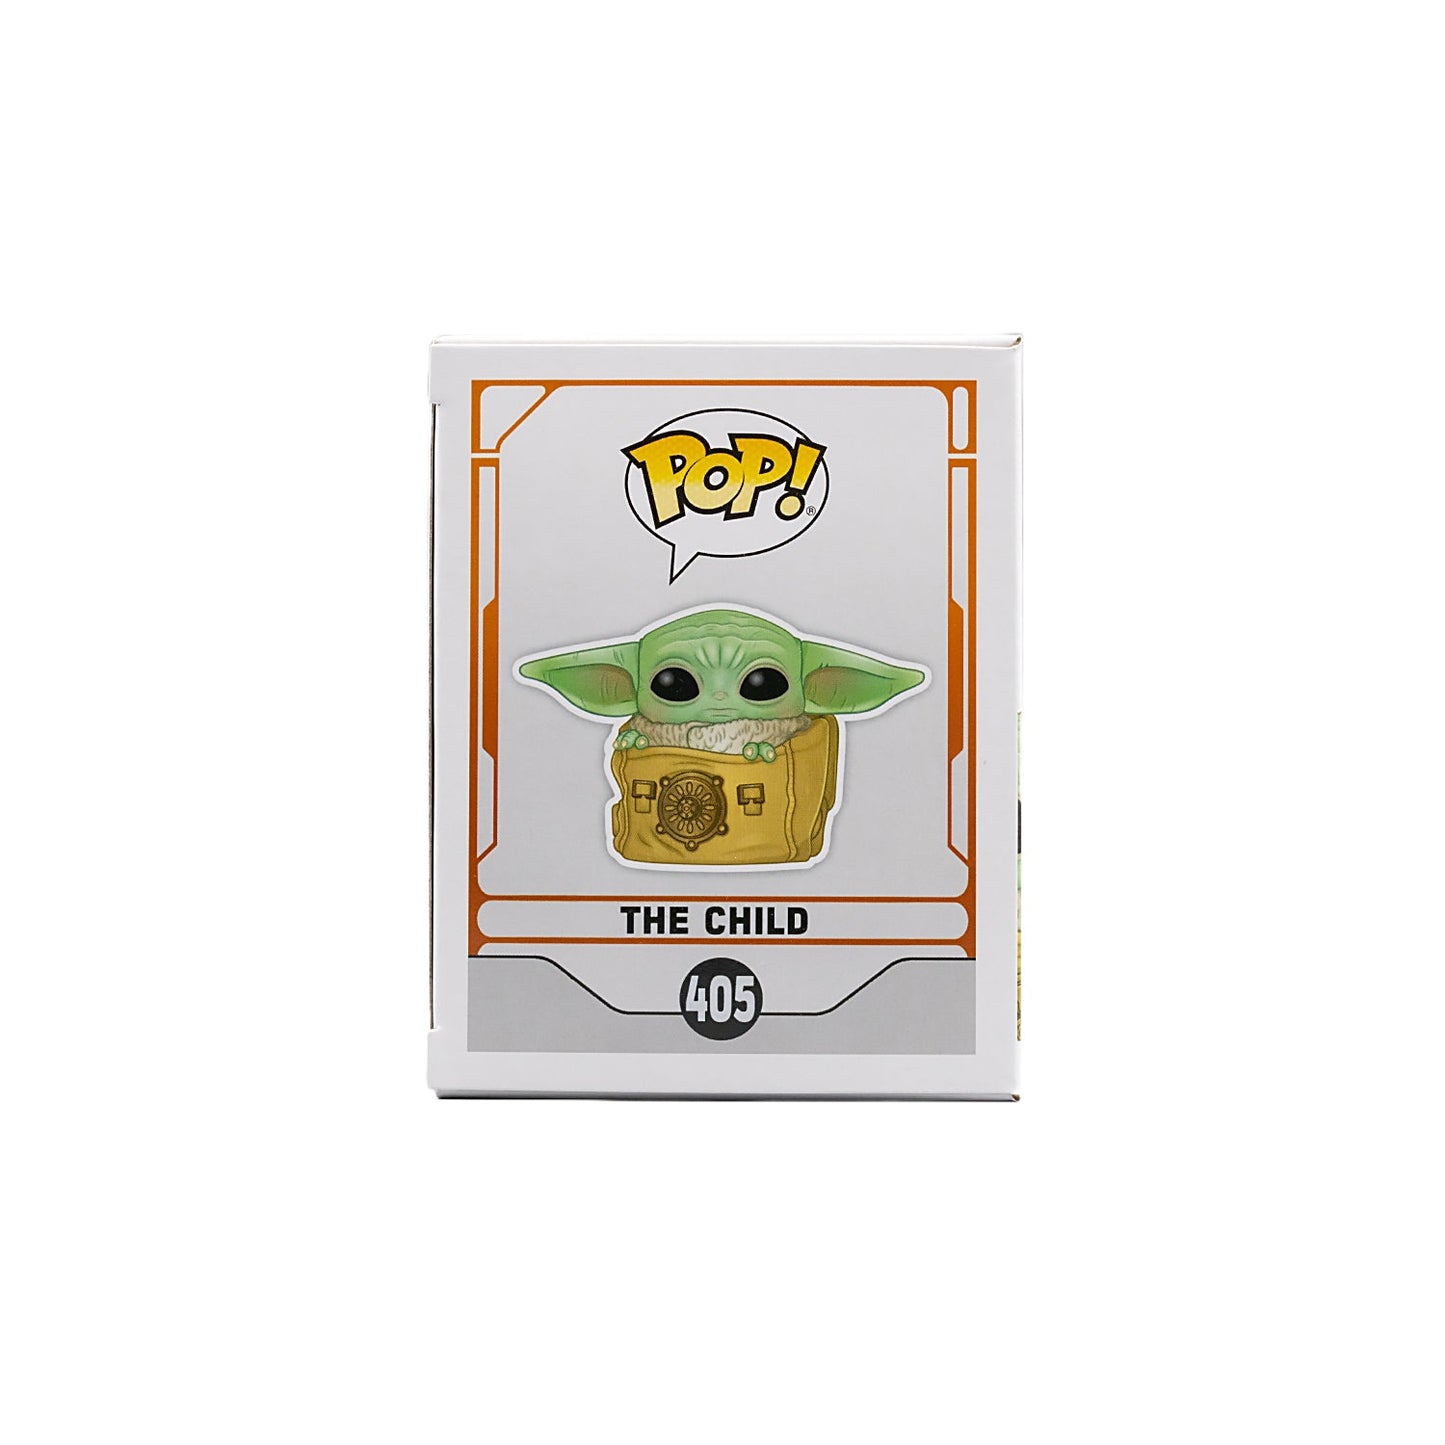 Funko Pop! Star Wars The Mandalorian The Child with Bag #405